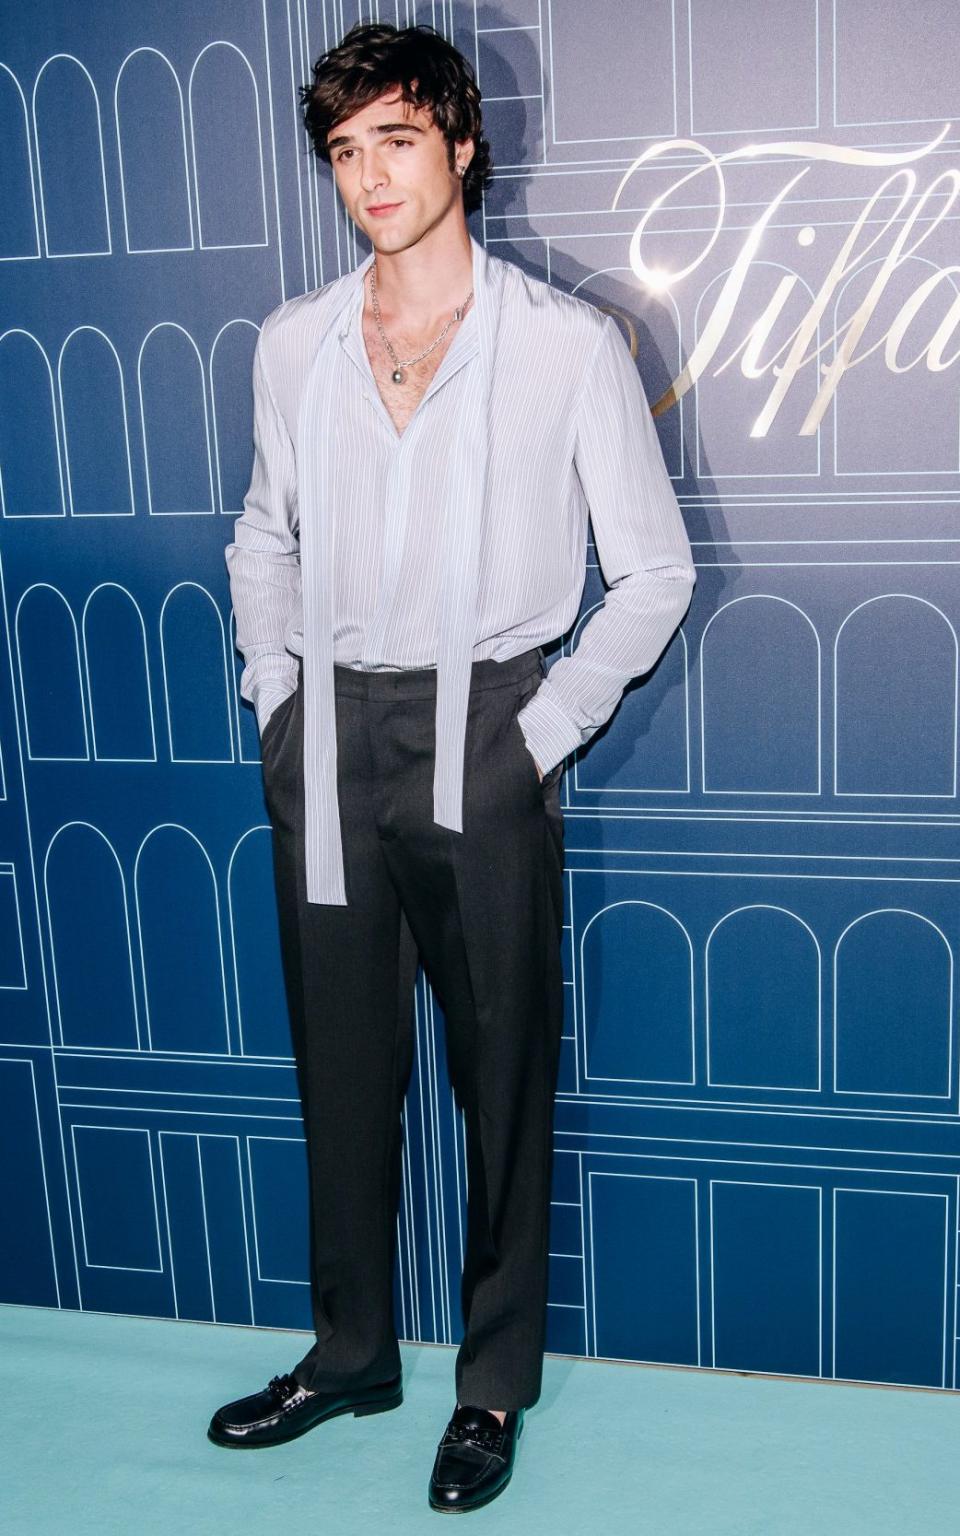 Jacob Elordi at the reopening of the Tiffany & Co. flagship store.  in New York City